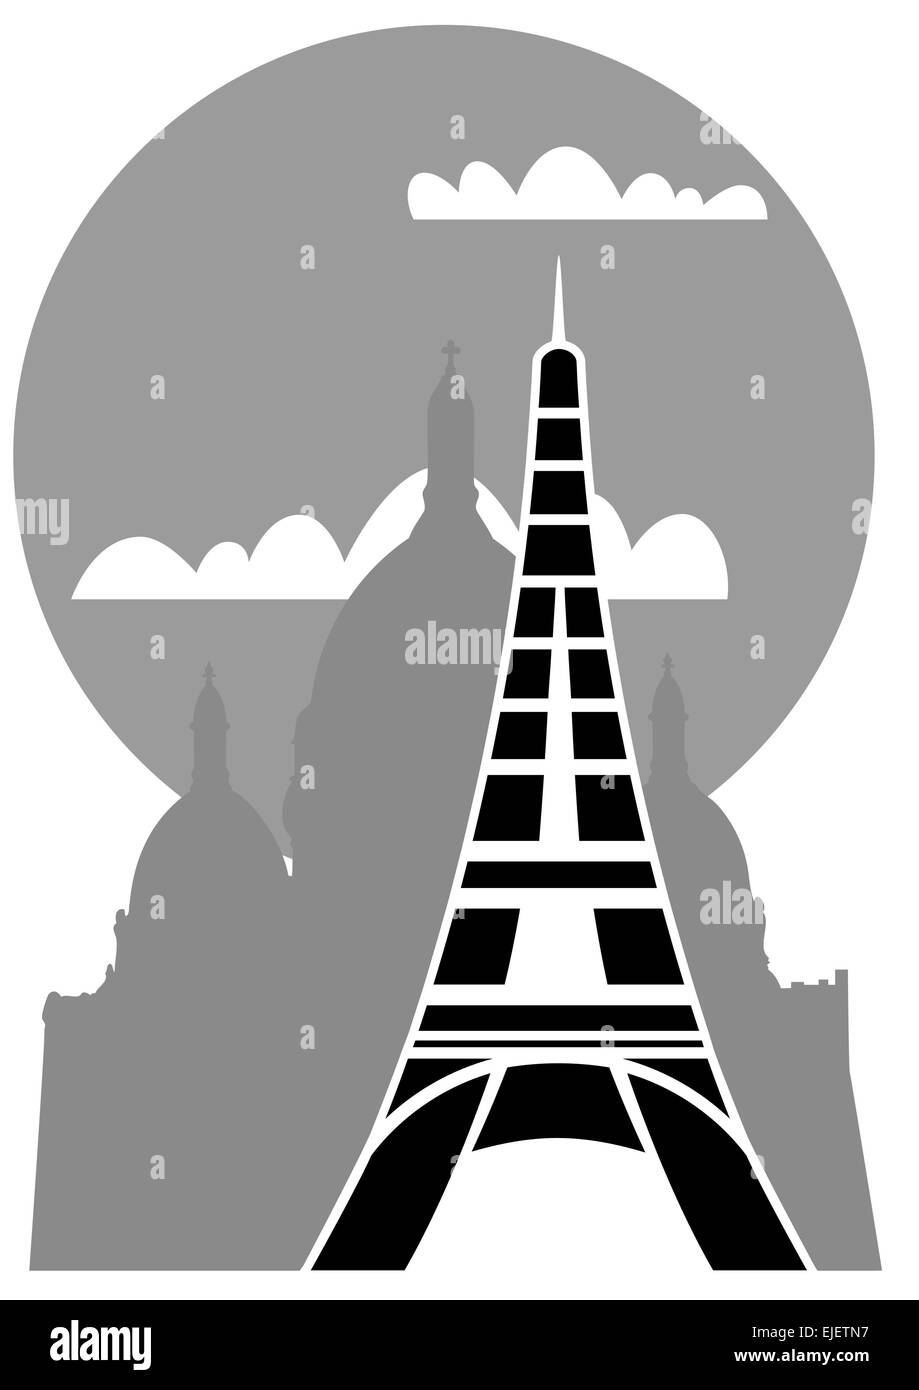 Illustration of the Eiffel Tower with Sacre Coeur in background - vector Stock Vector